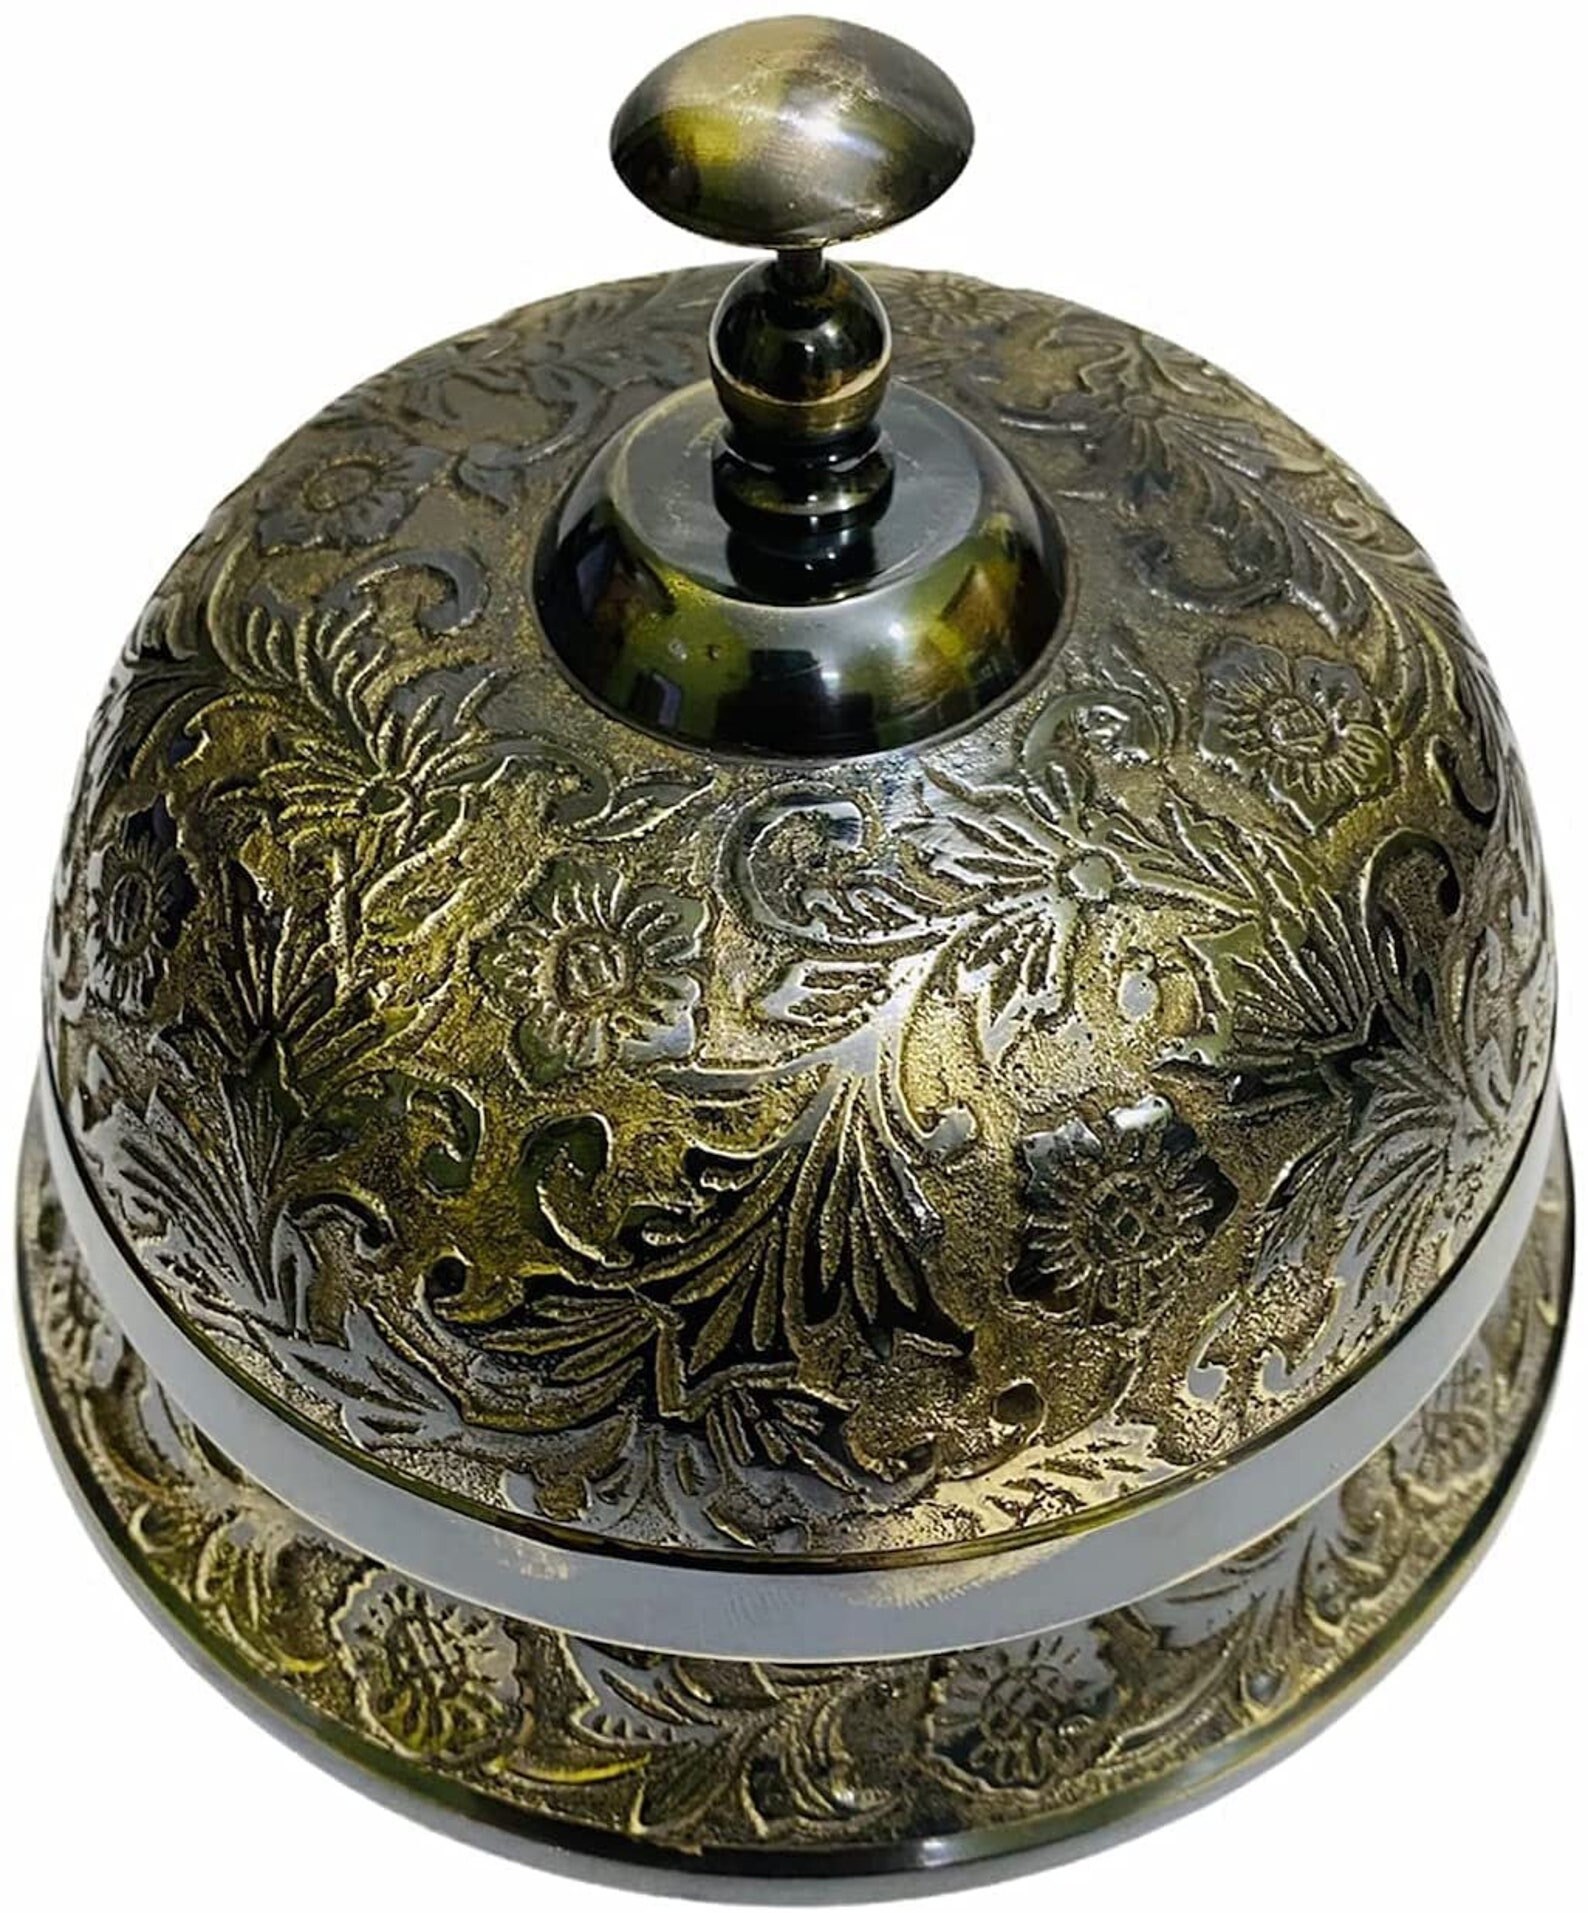 Nautical Table Bell Solid Brass Hotel Decor/Office/Motel/Service Bell Item 